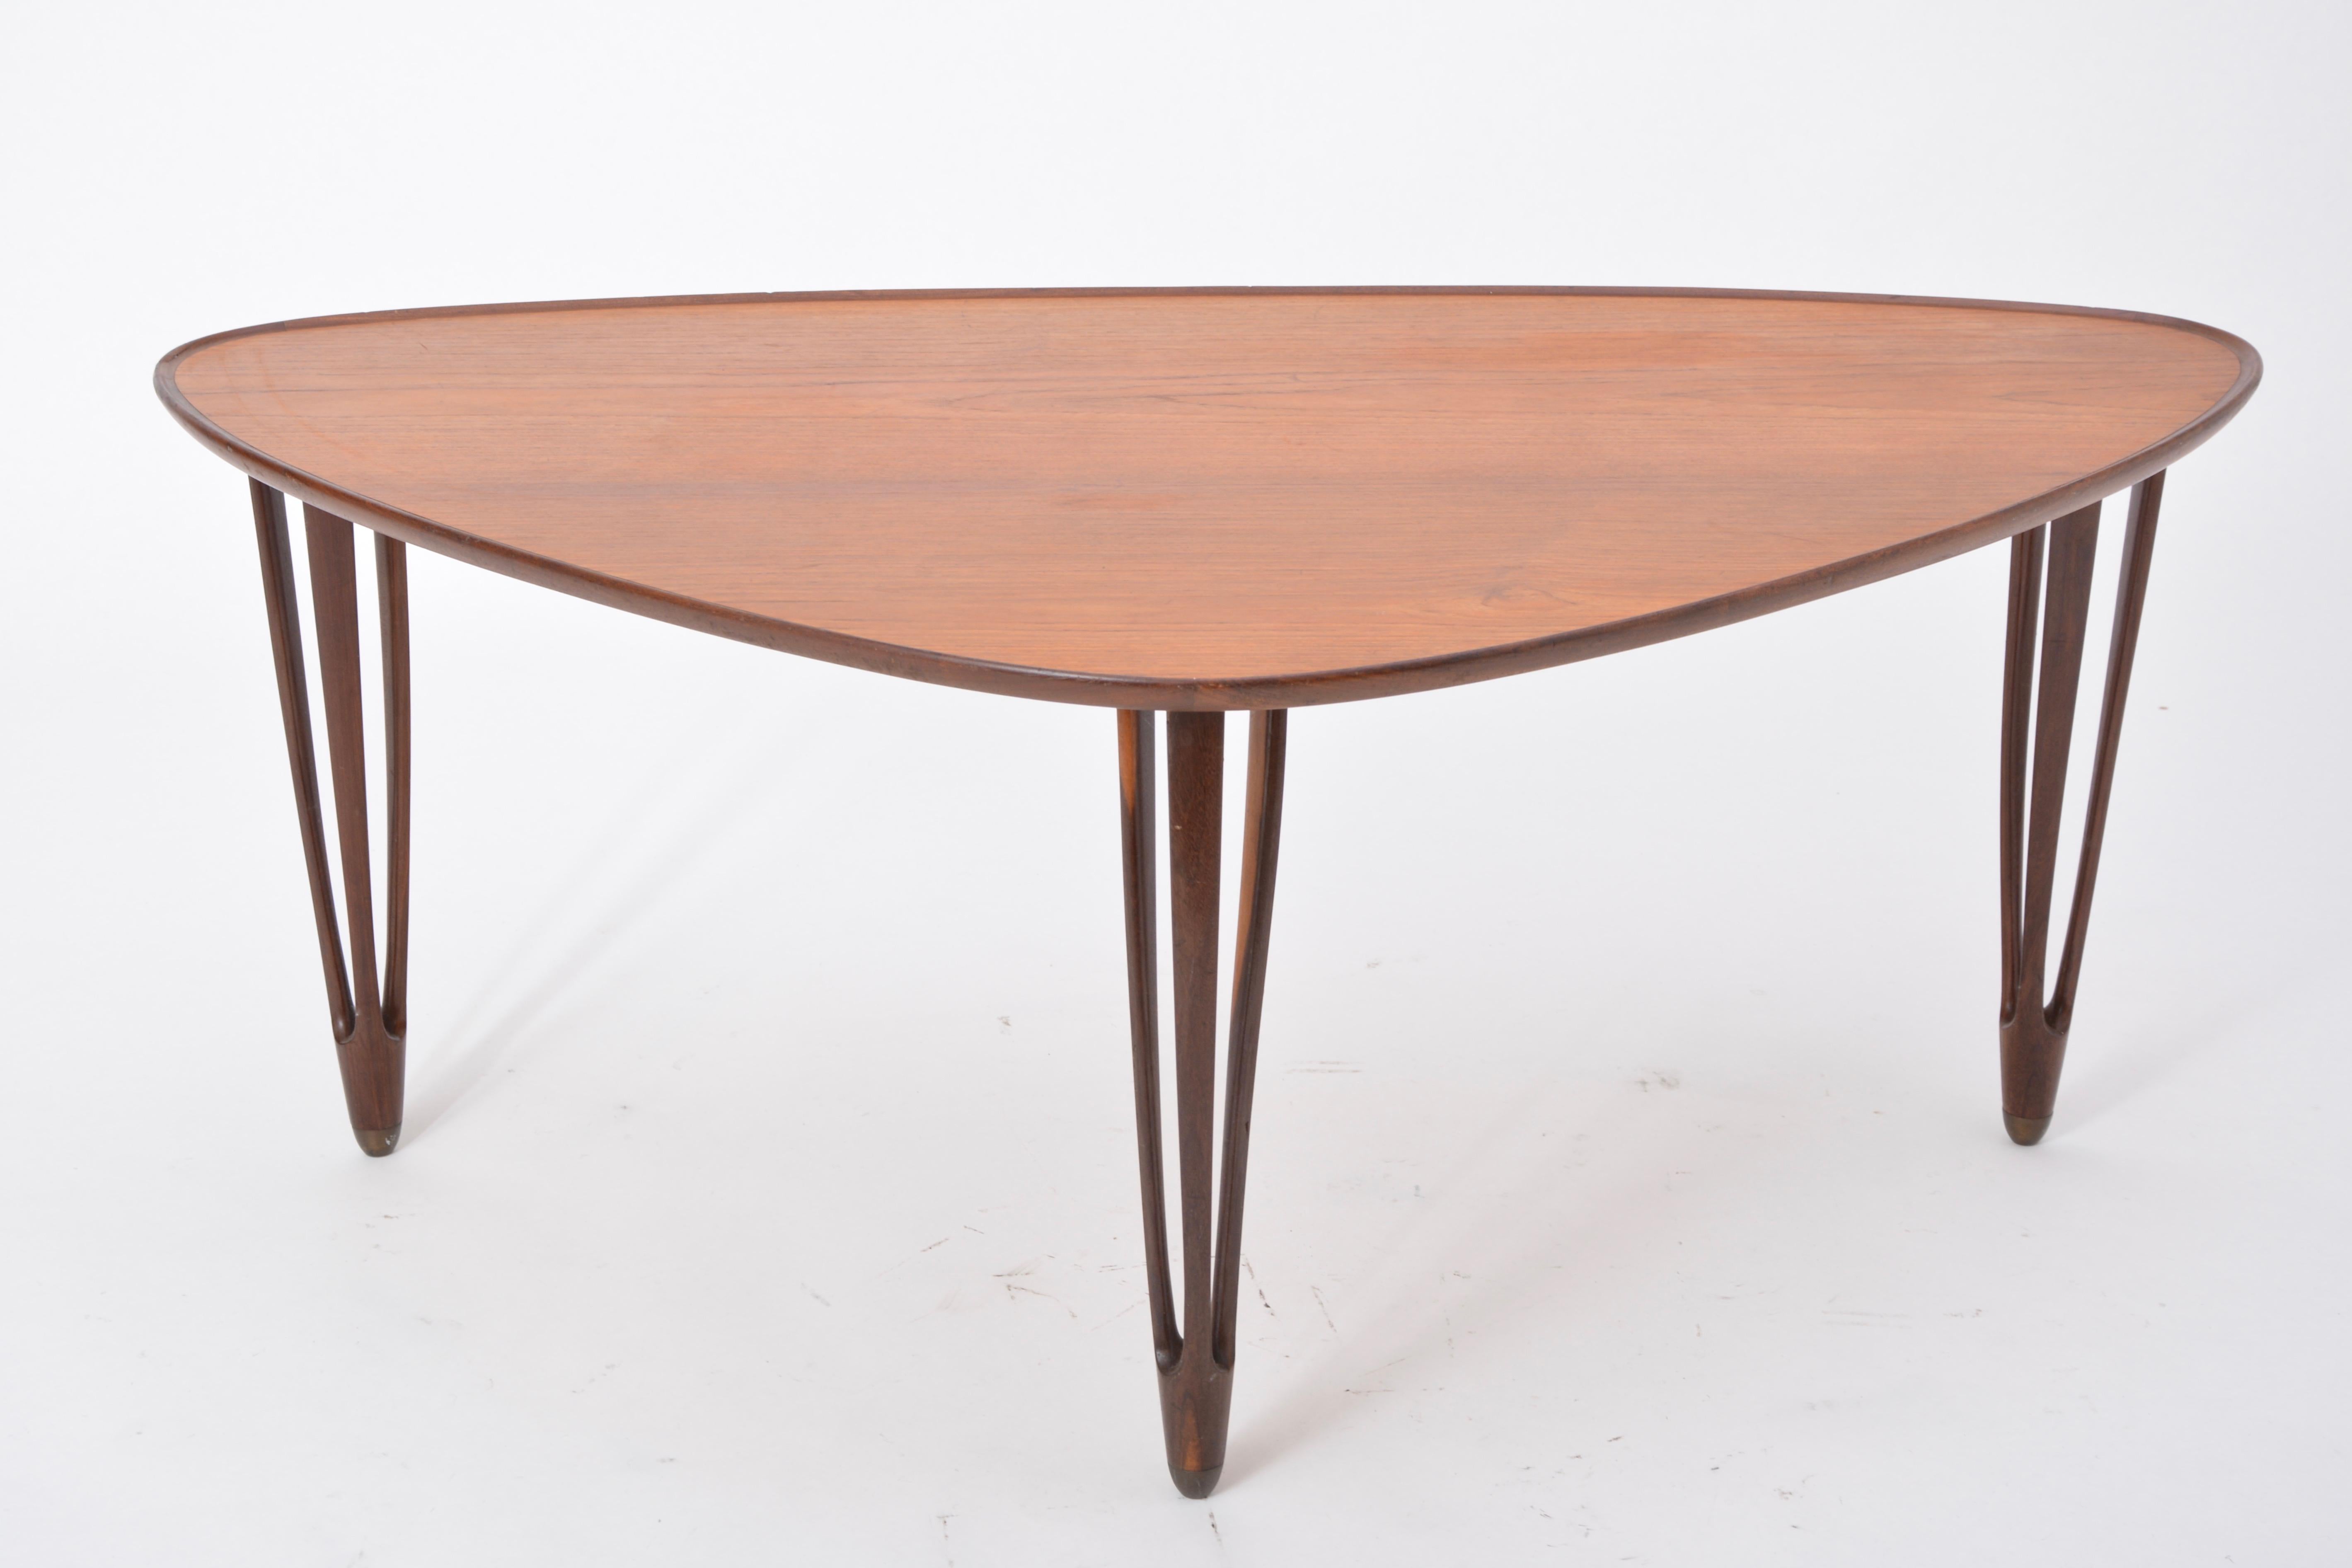 Danish Mid-Century Modern Teak tripod coffee table from BC Mobler

An asymmetrical tripod coffee table made from teak with rounded edges and brass feet, produced by Danish company B.C. Møbler in the 1950s.